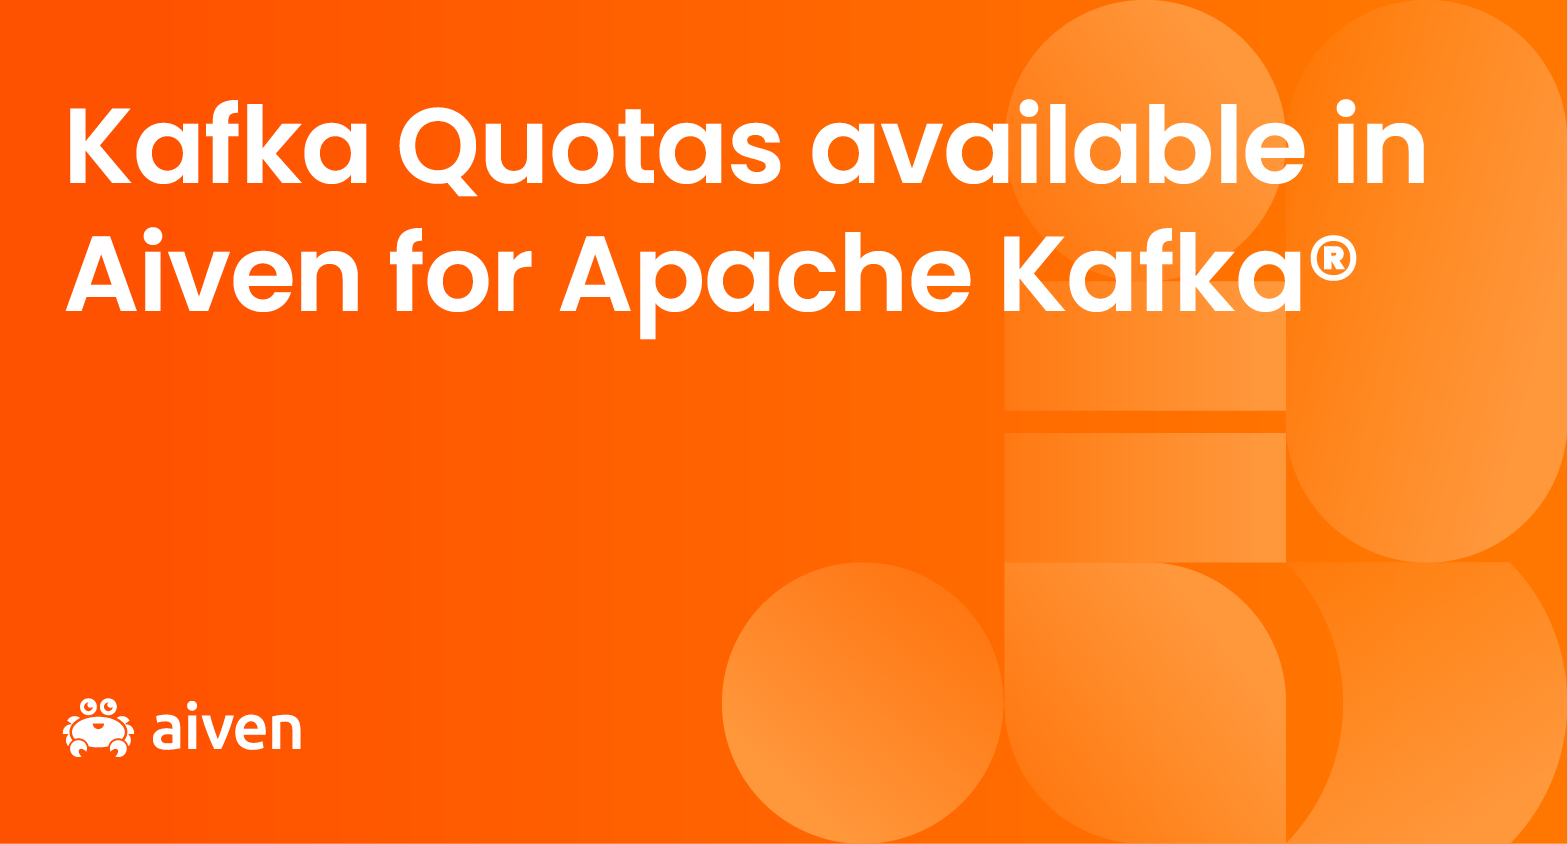 Aiven for Apache Kafka, Kafka, Apache Kafka, Kafka Quotas, Quotas in Apache Kafka, Introduction to Quotas in Kafka, Kafka managed service, fully managed Kafka 